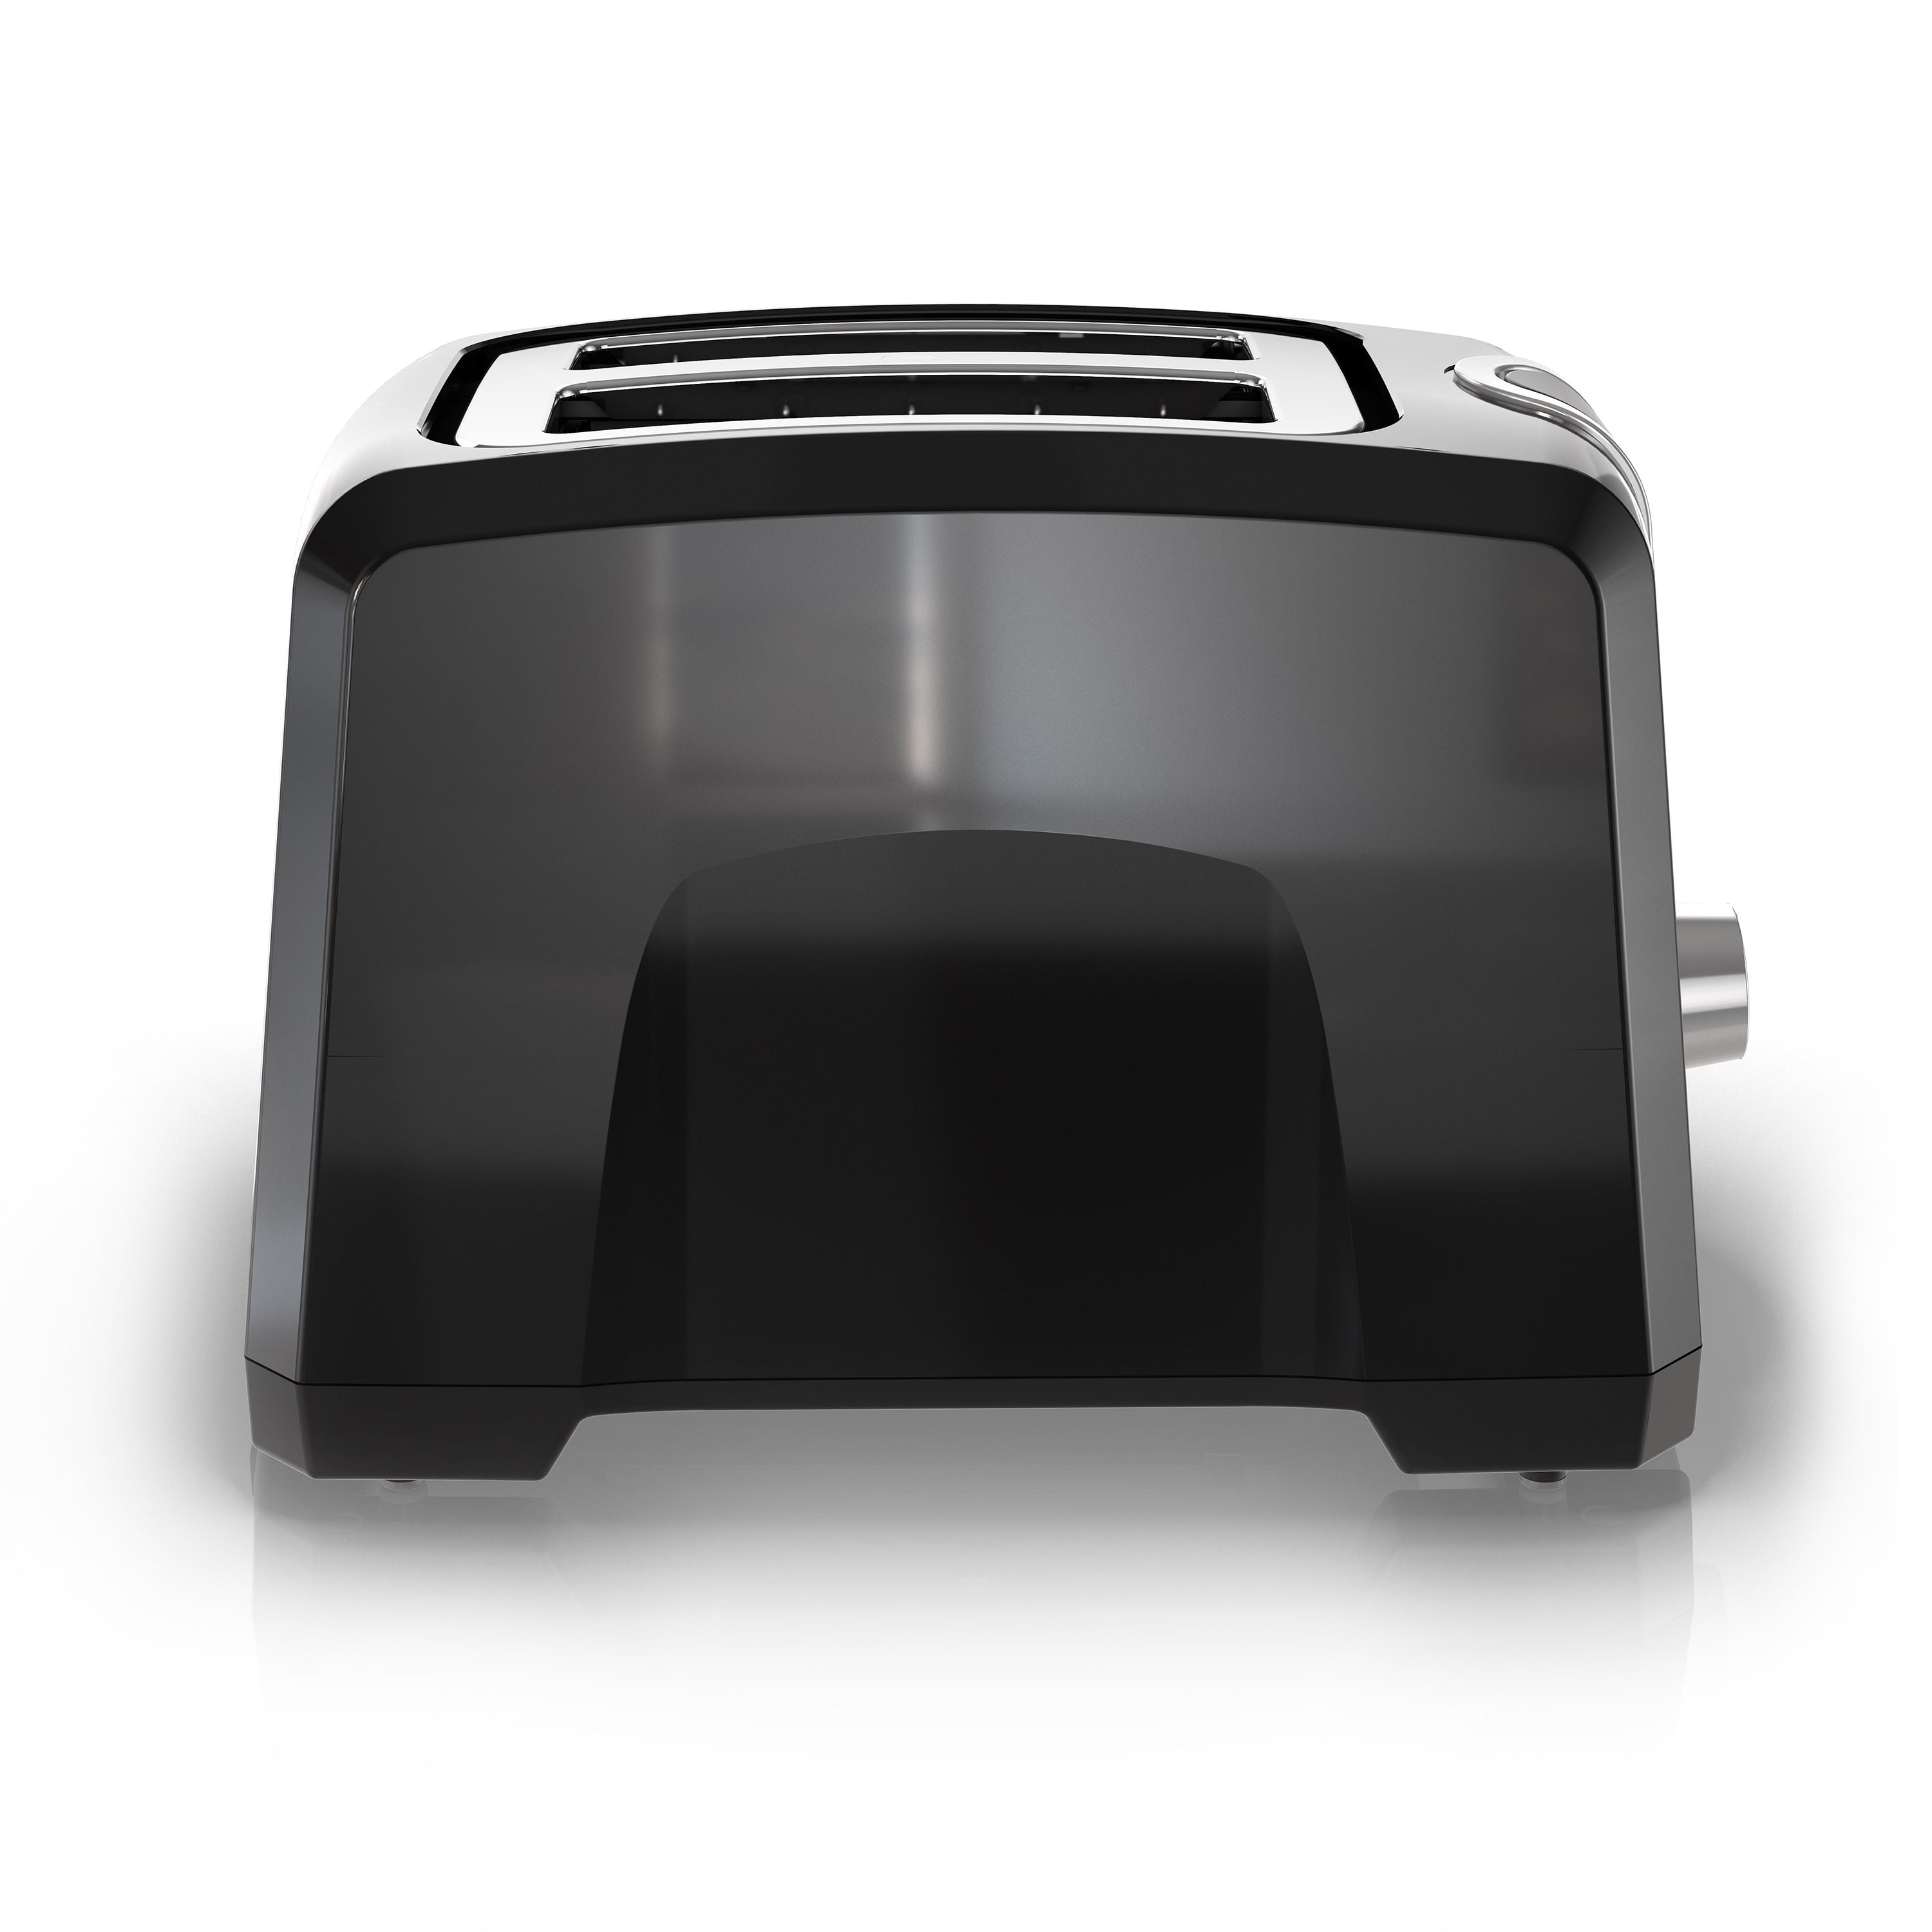 Café Express Finish 2-Slice Toaster | Extra-Wide Slots, Extra Lift for  Waffles, Pastries, Texas Toast & More | 4 Pre-Set Functions, 8 Shade  Options 